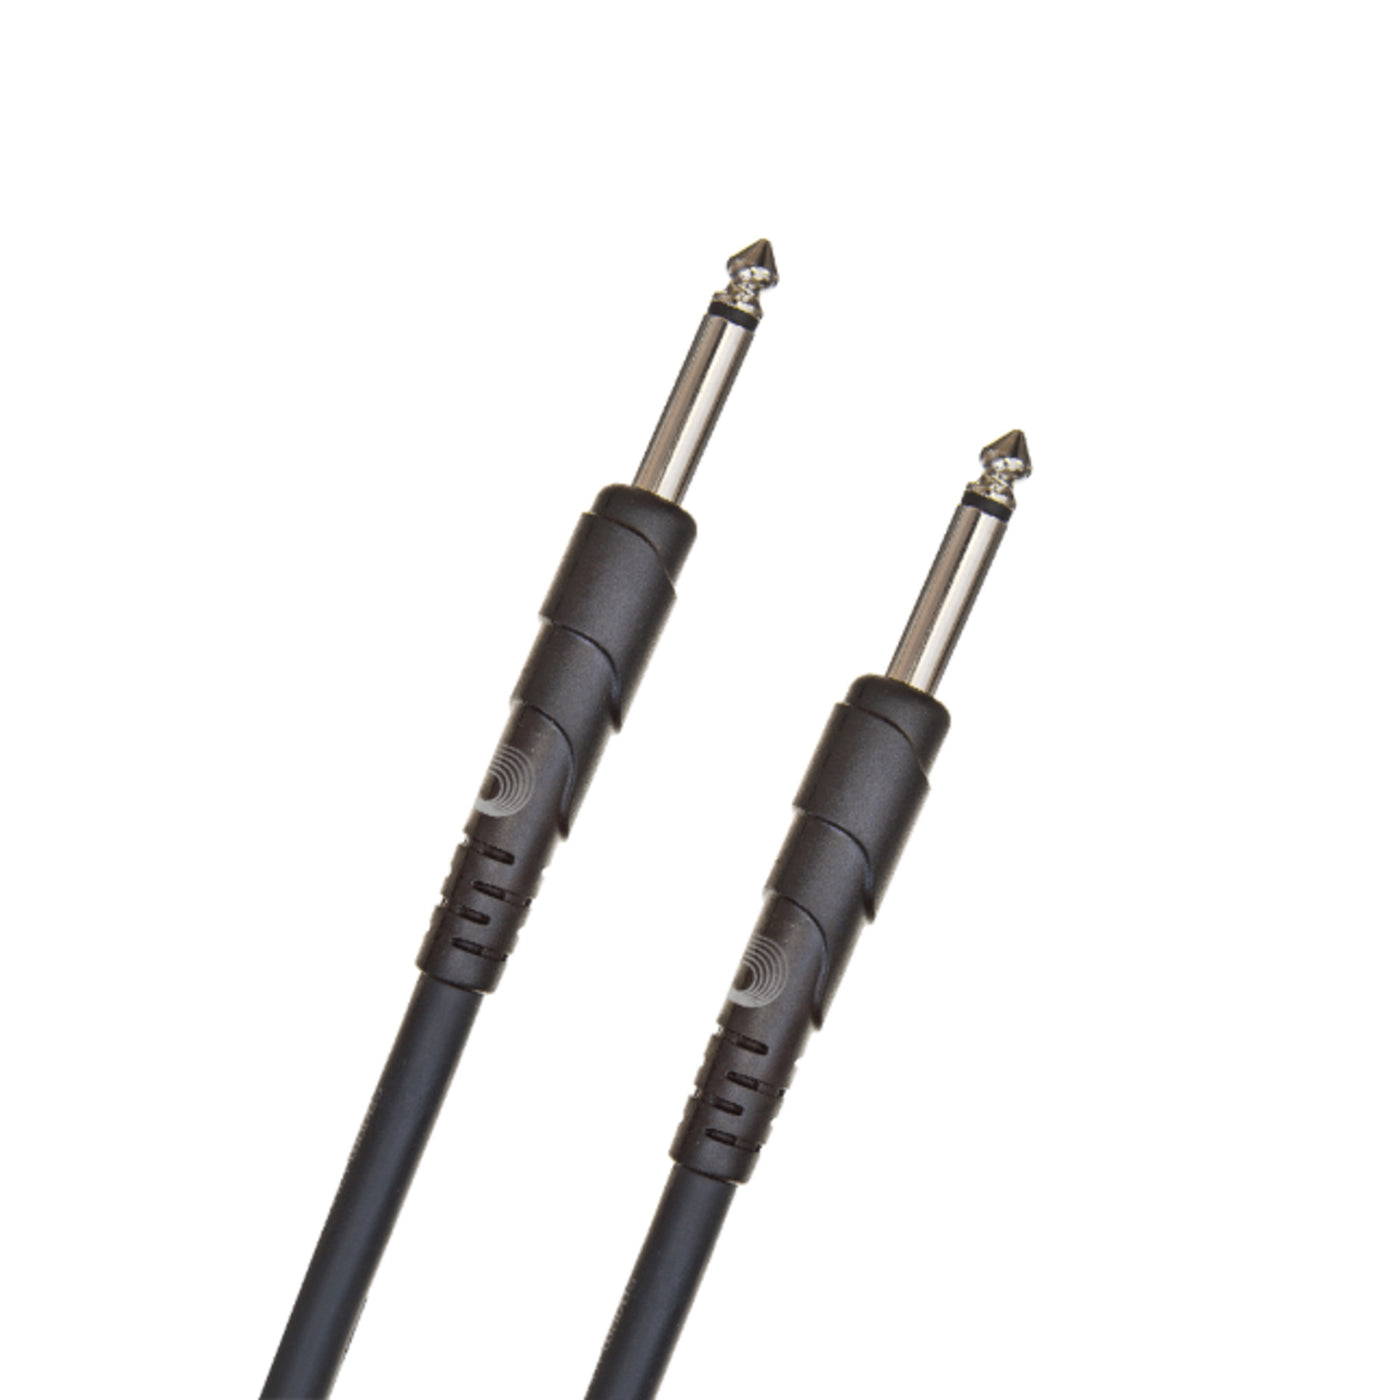 D'Addario Classic Series Instrument Cable, 5 feet (PW-CGT-05)